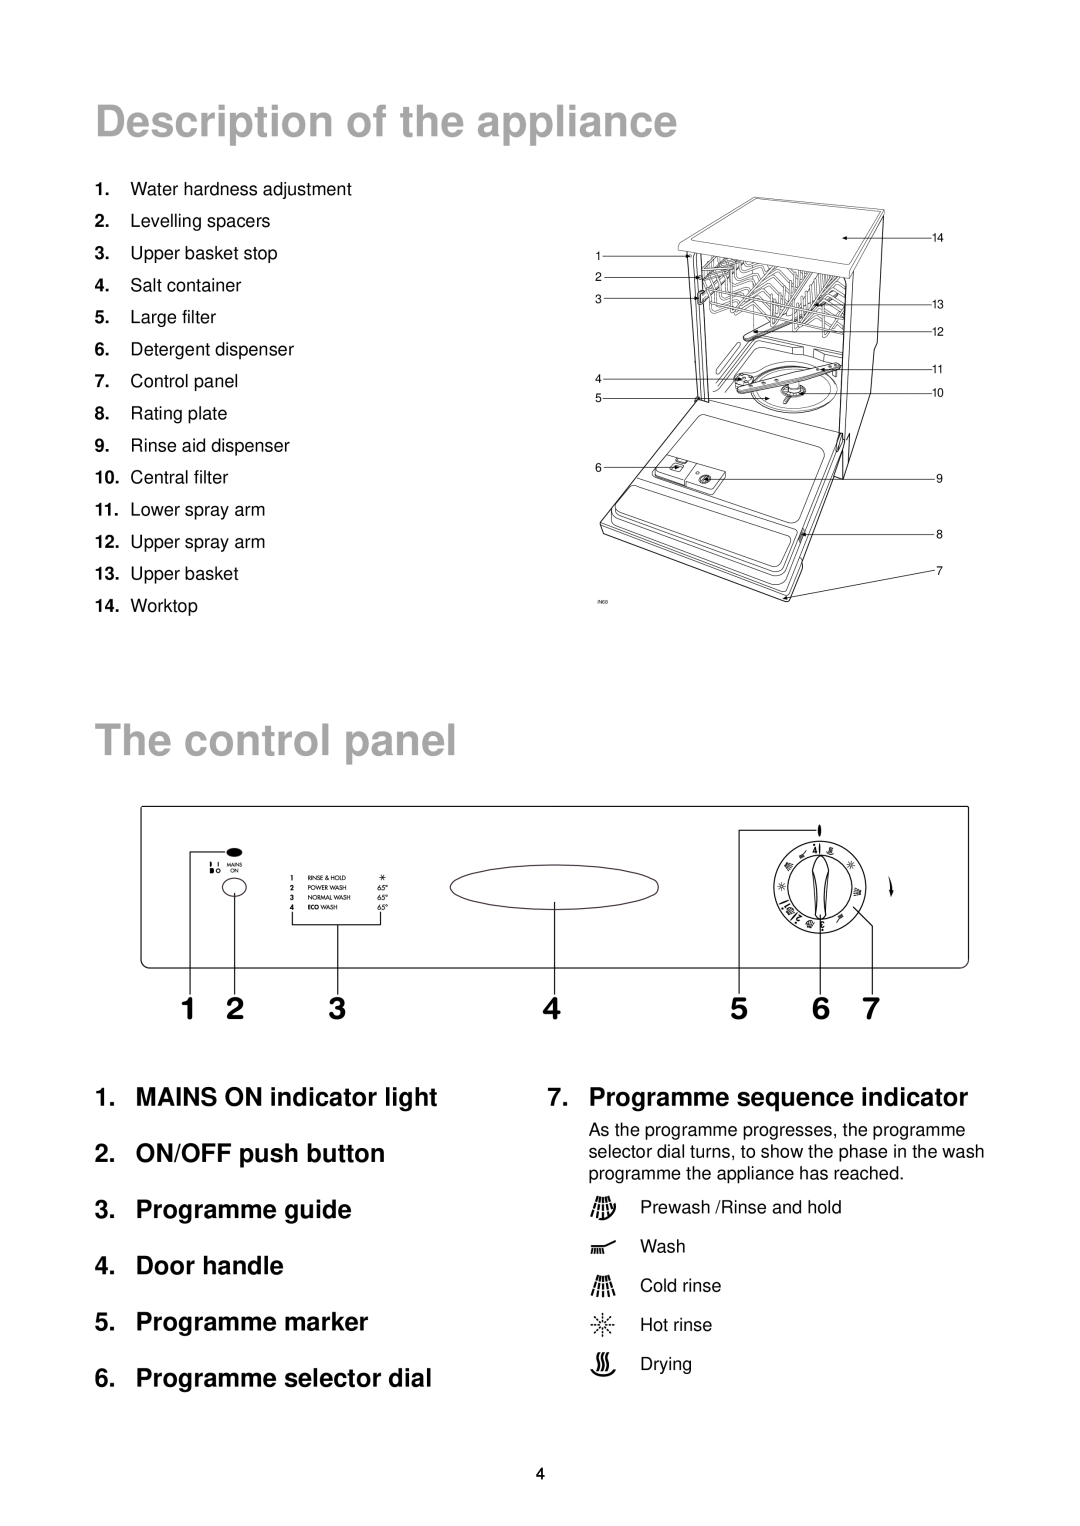 Tricity Bendix DH 101 manual The control panel, Description of the appliance, Programme sequence indicator 